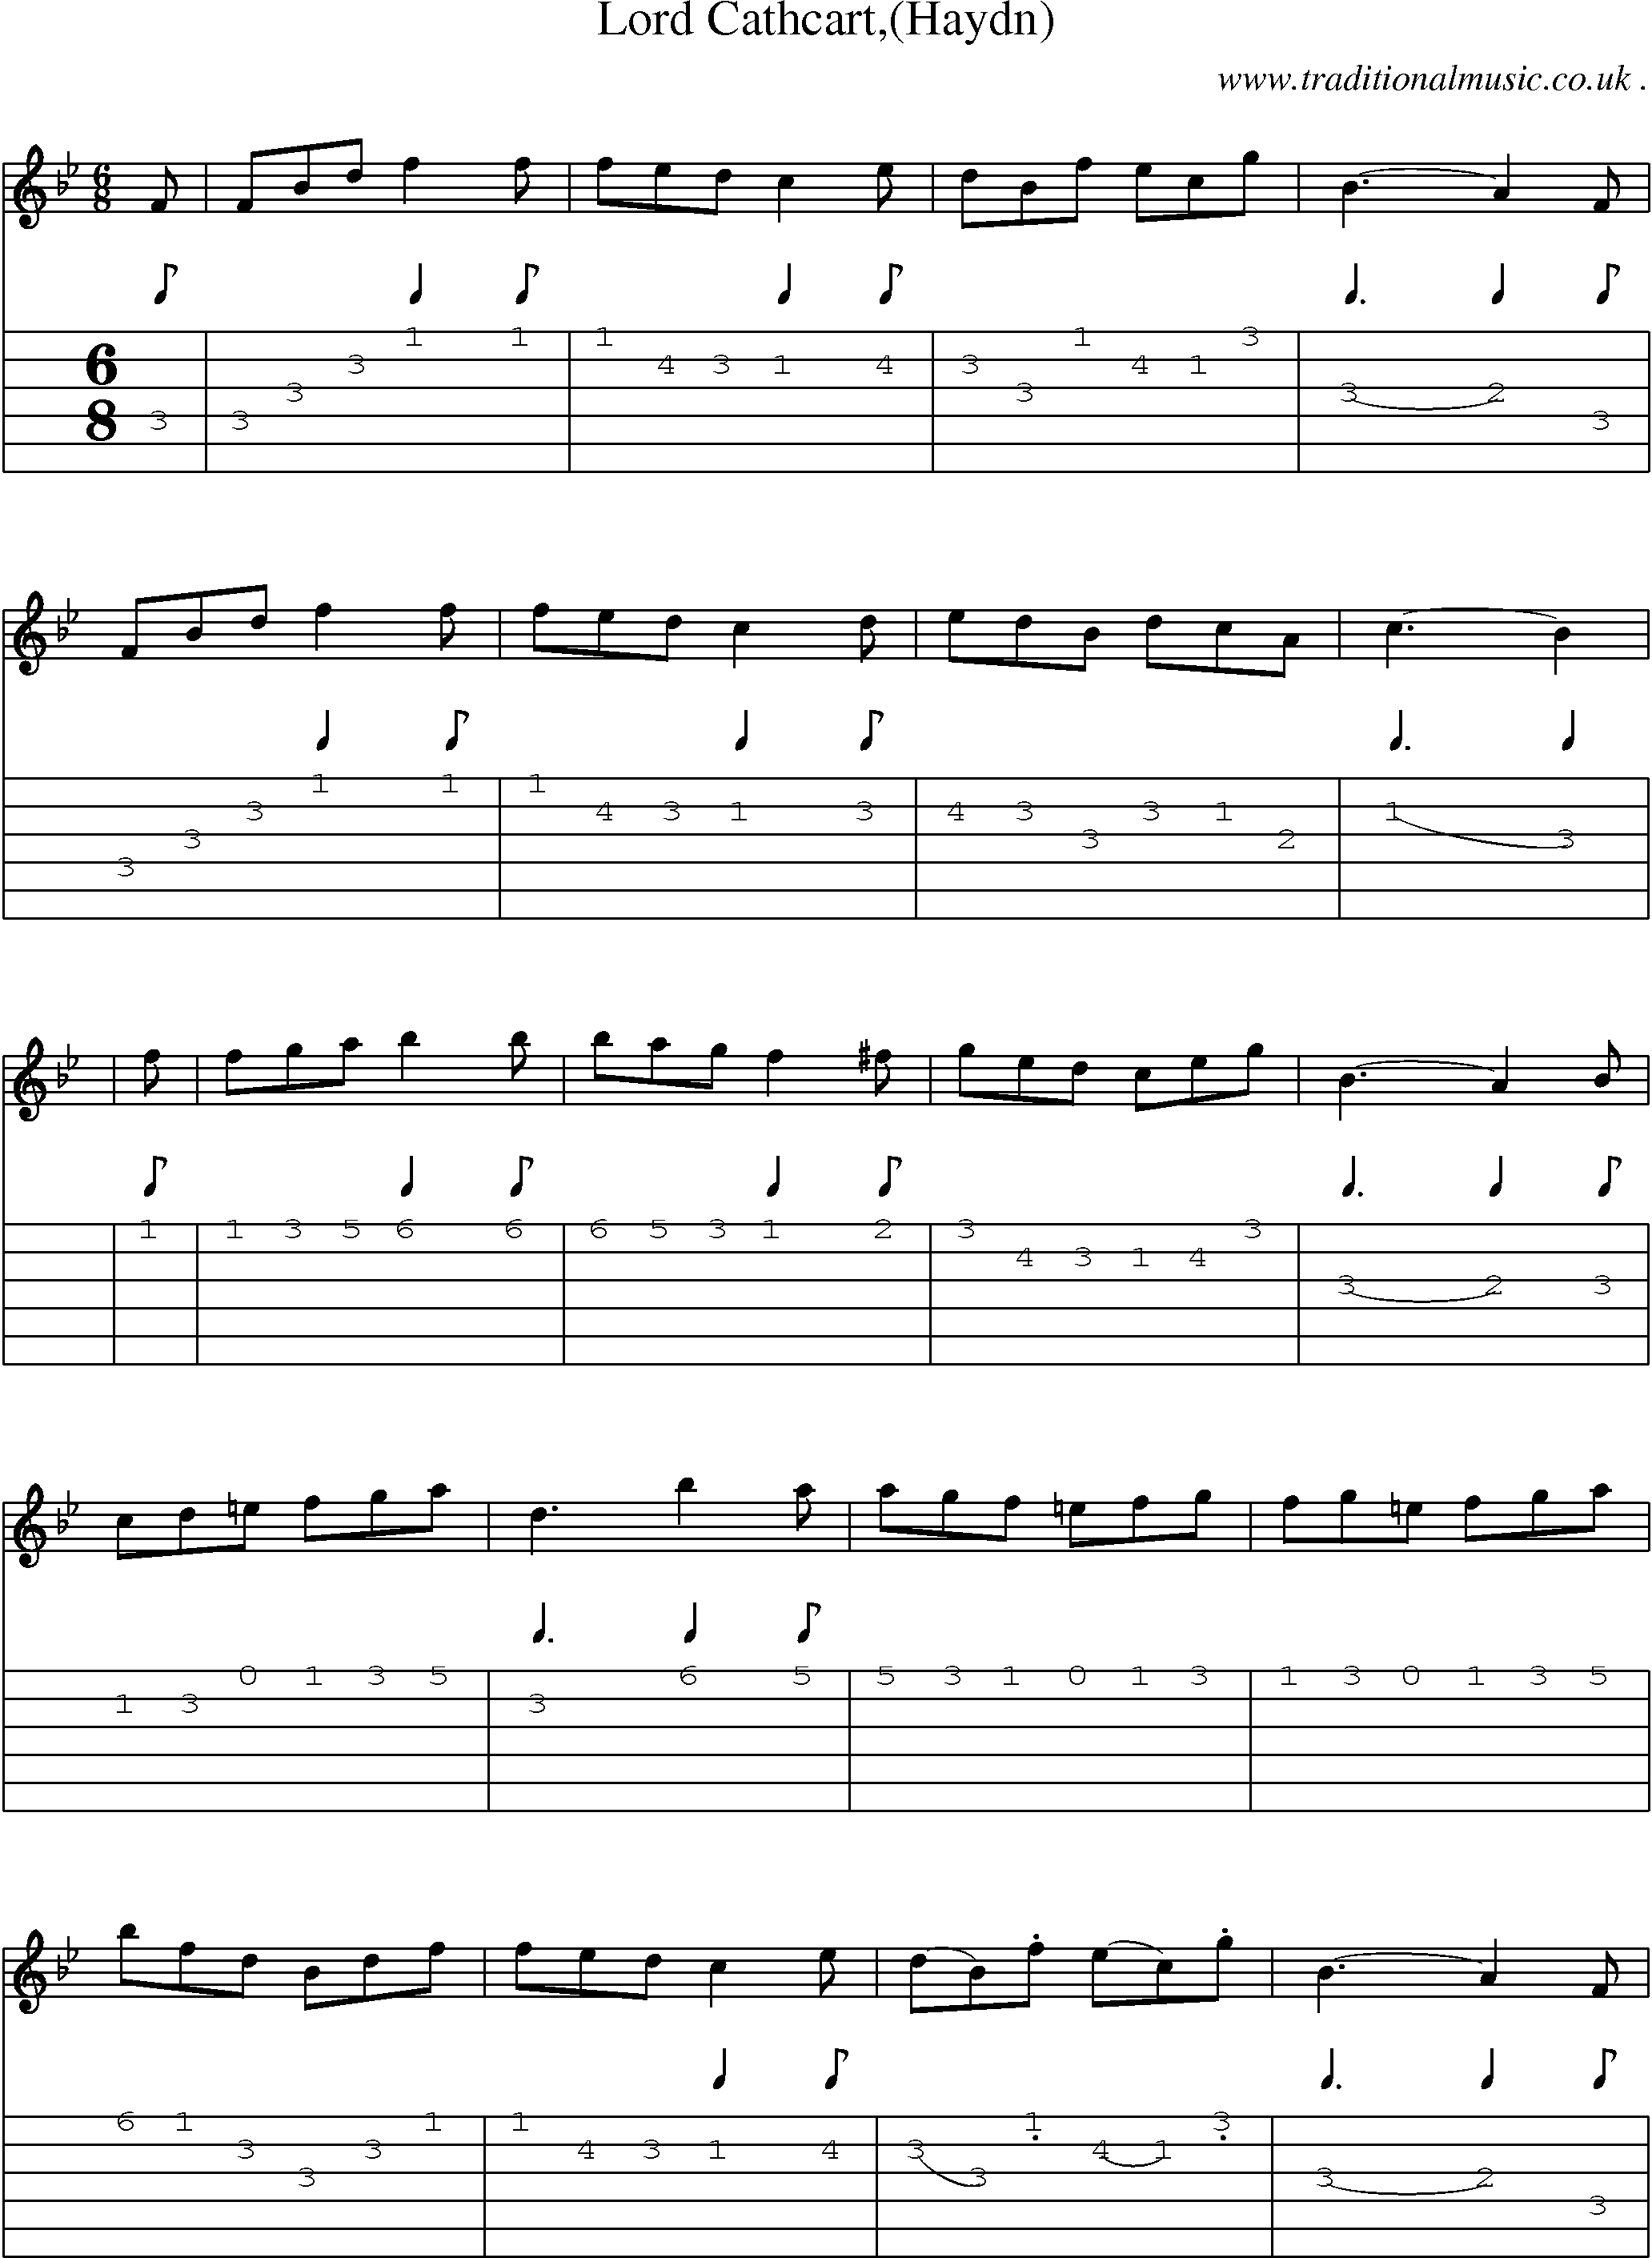 Sheet-Music and Guitar Tabs for Lord Cathcart(haydn)